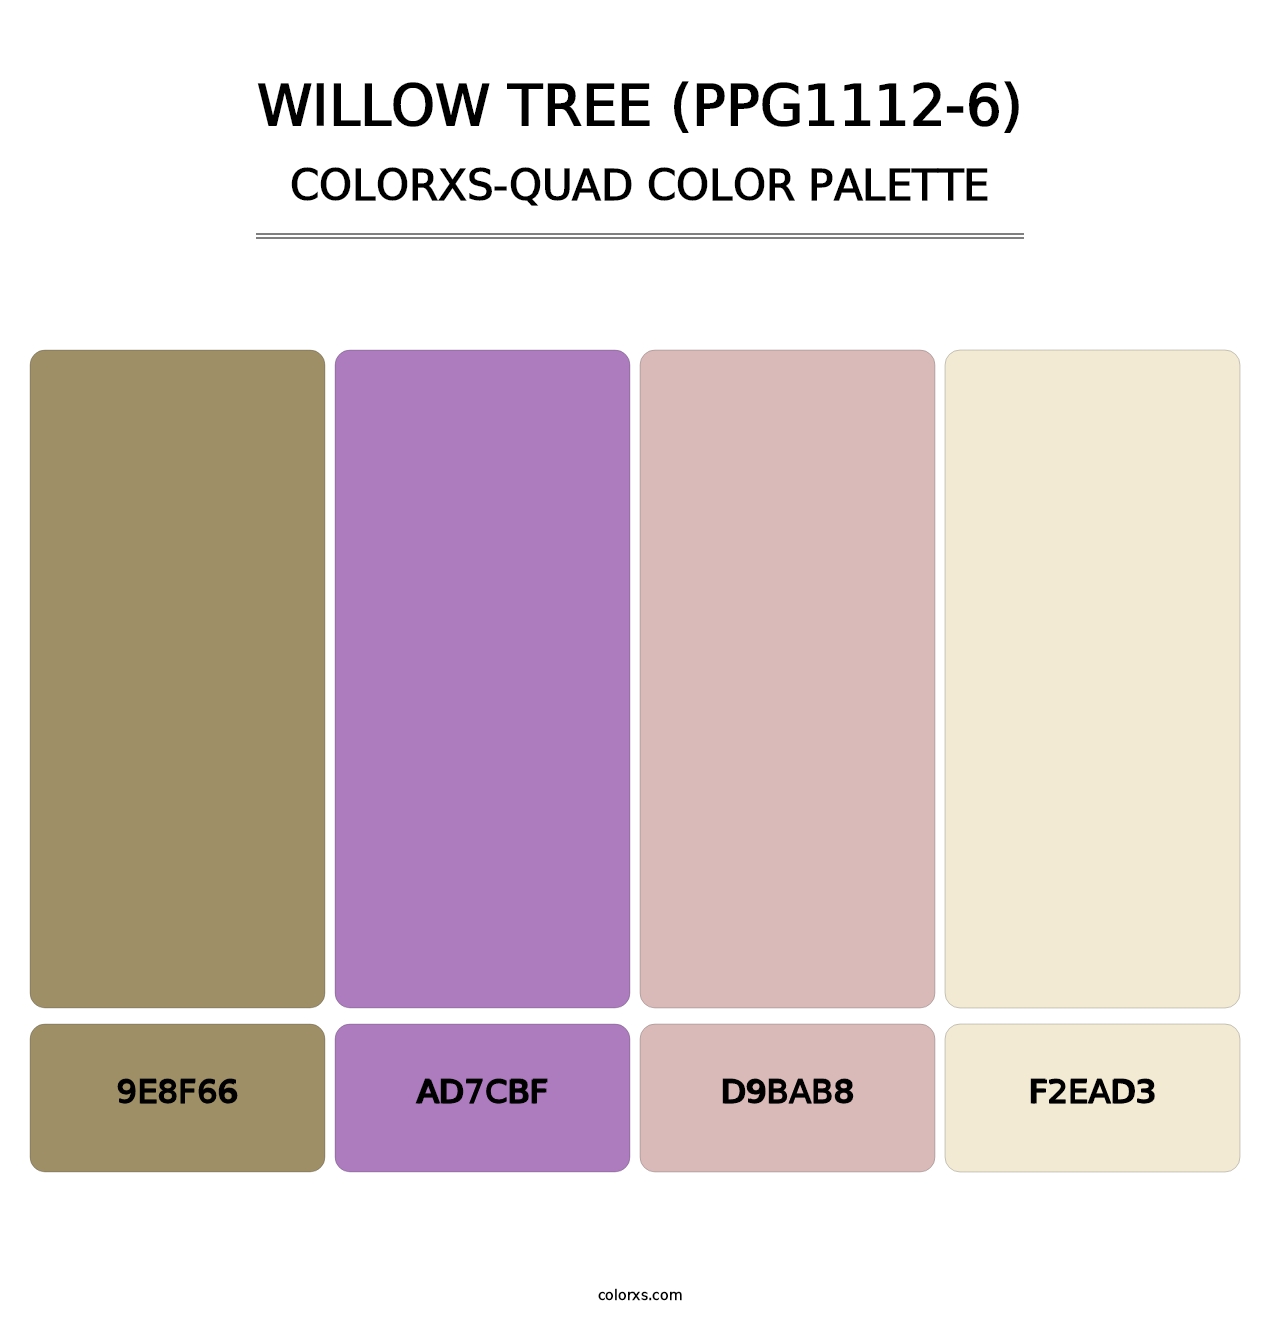 Willow Tree (PPG1112-6) - Colorxs Quad Palette